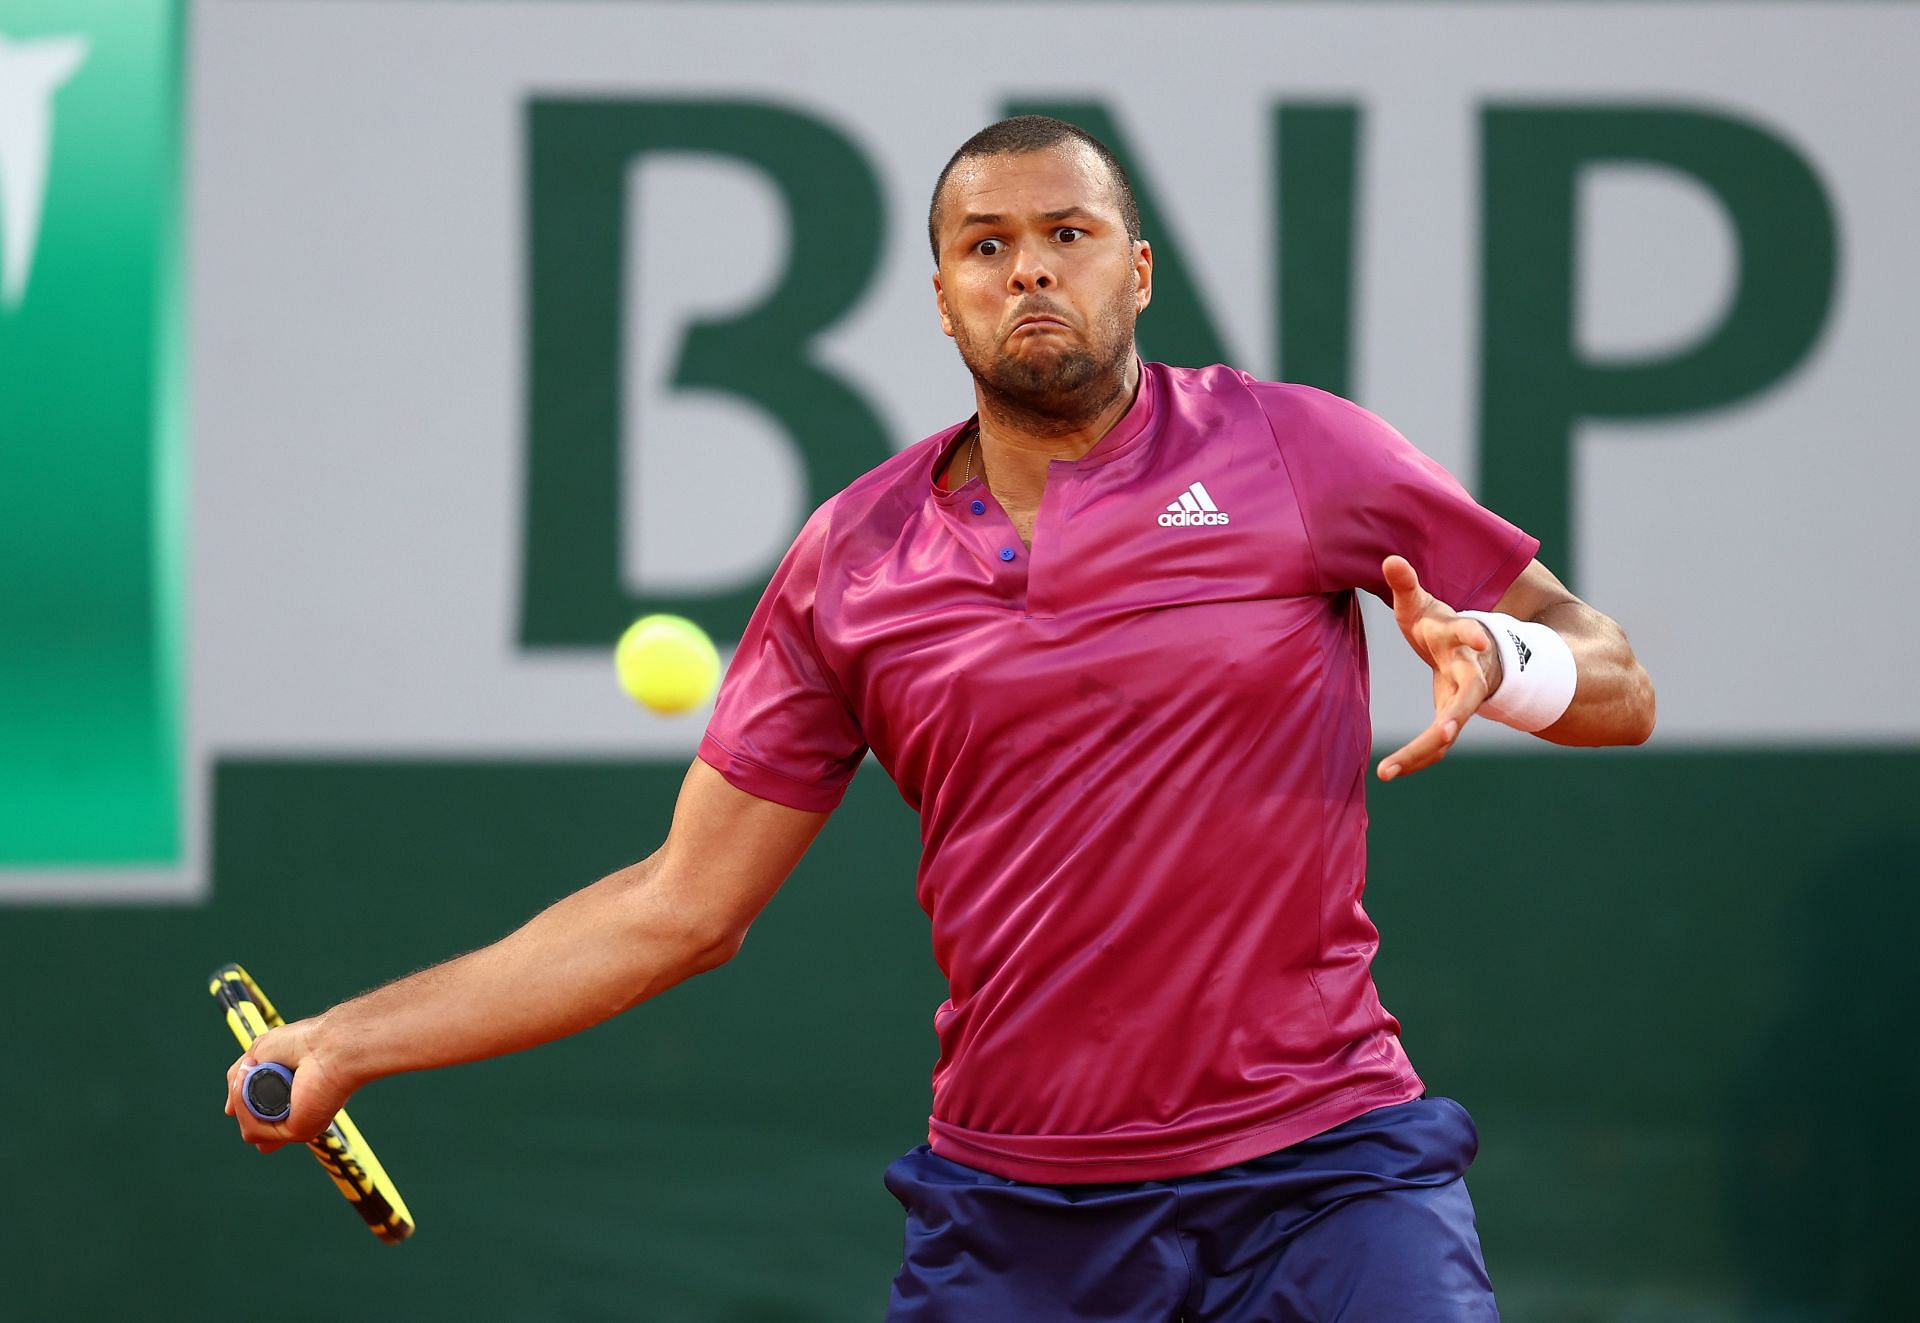 Jo-Wilfried Tsonga in action at the French Open 2021